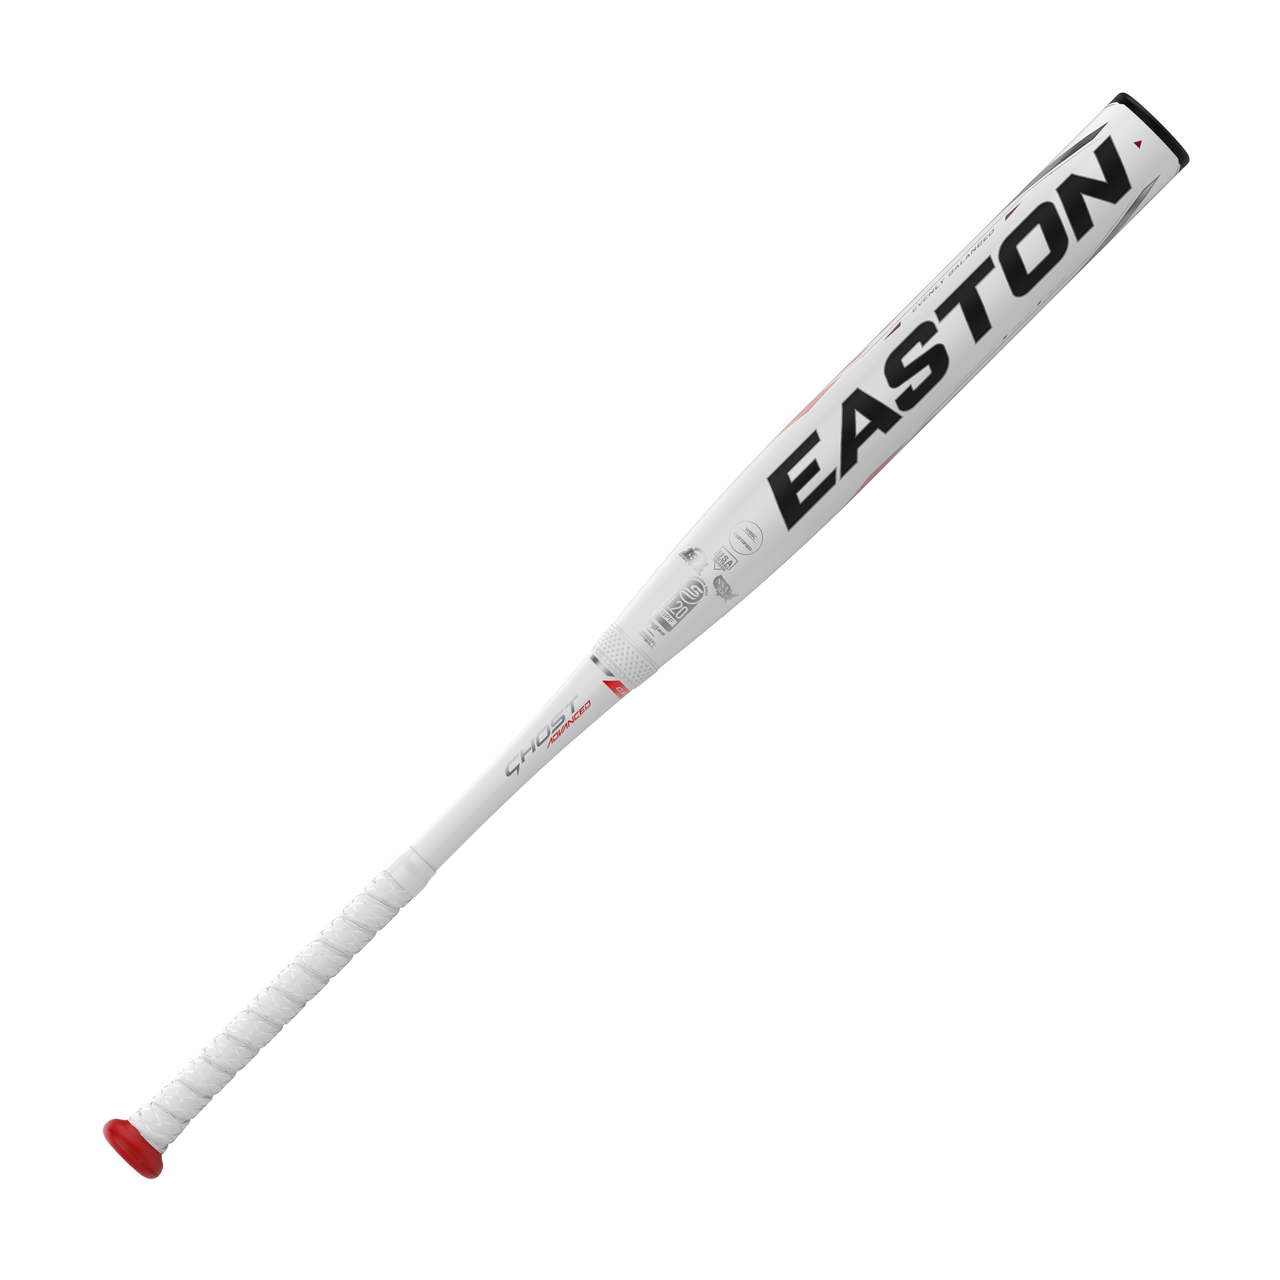 2022 Easton Ghost Advanced (-11) Fastpitch Batt - (SEE PRODUCT DESCRIPTIONS FOR DELIVERY DETAILS) Bat Club USA